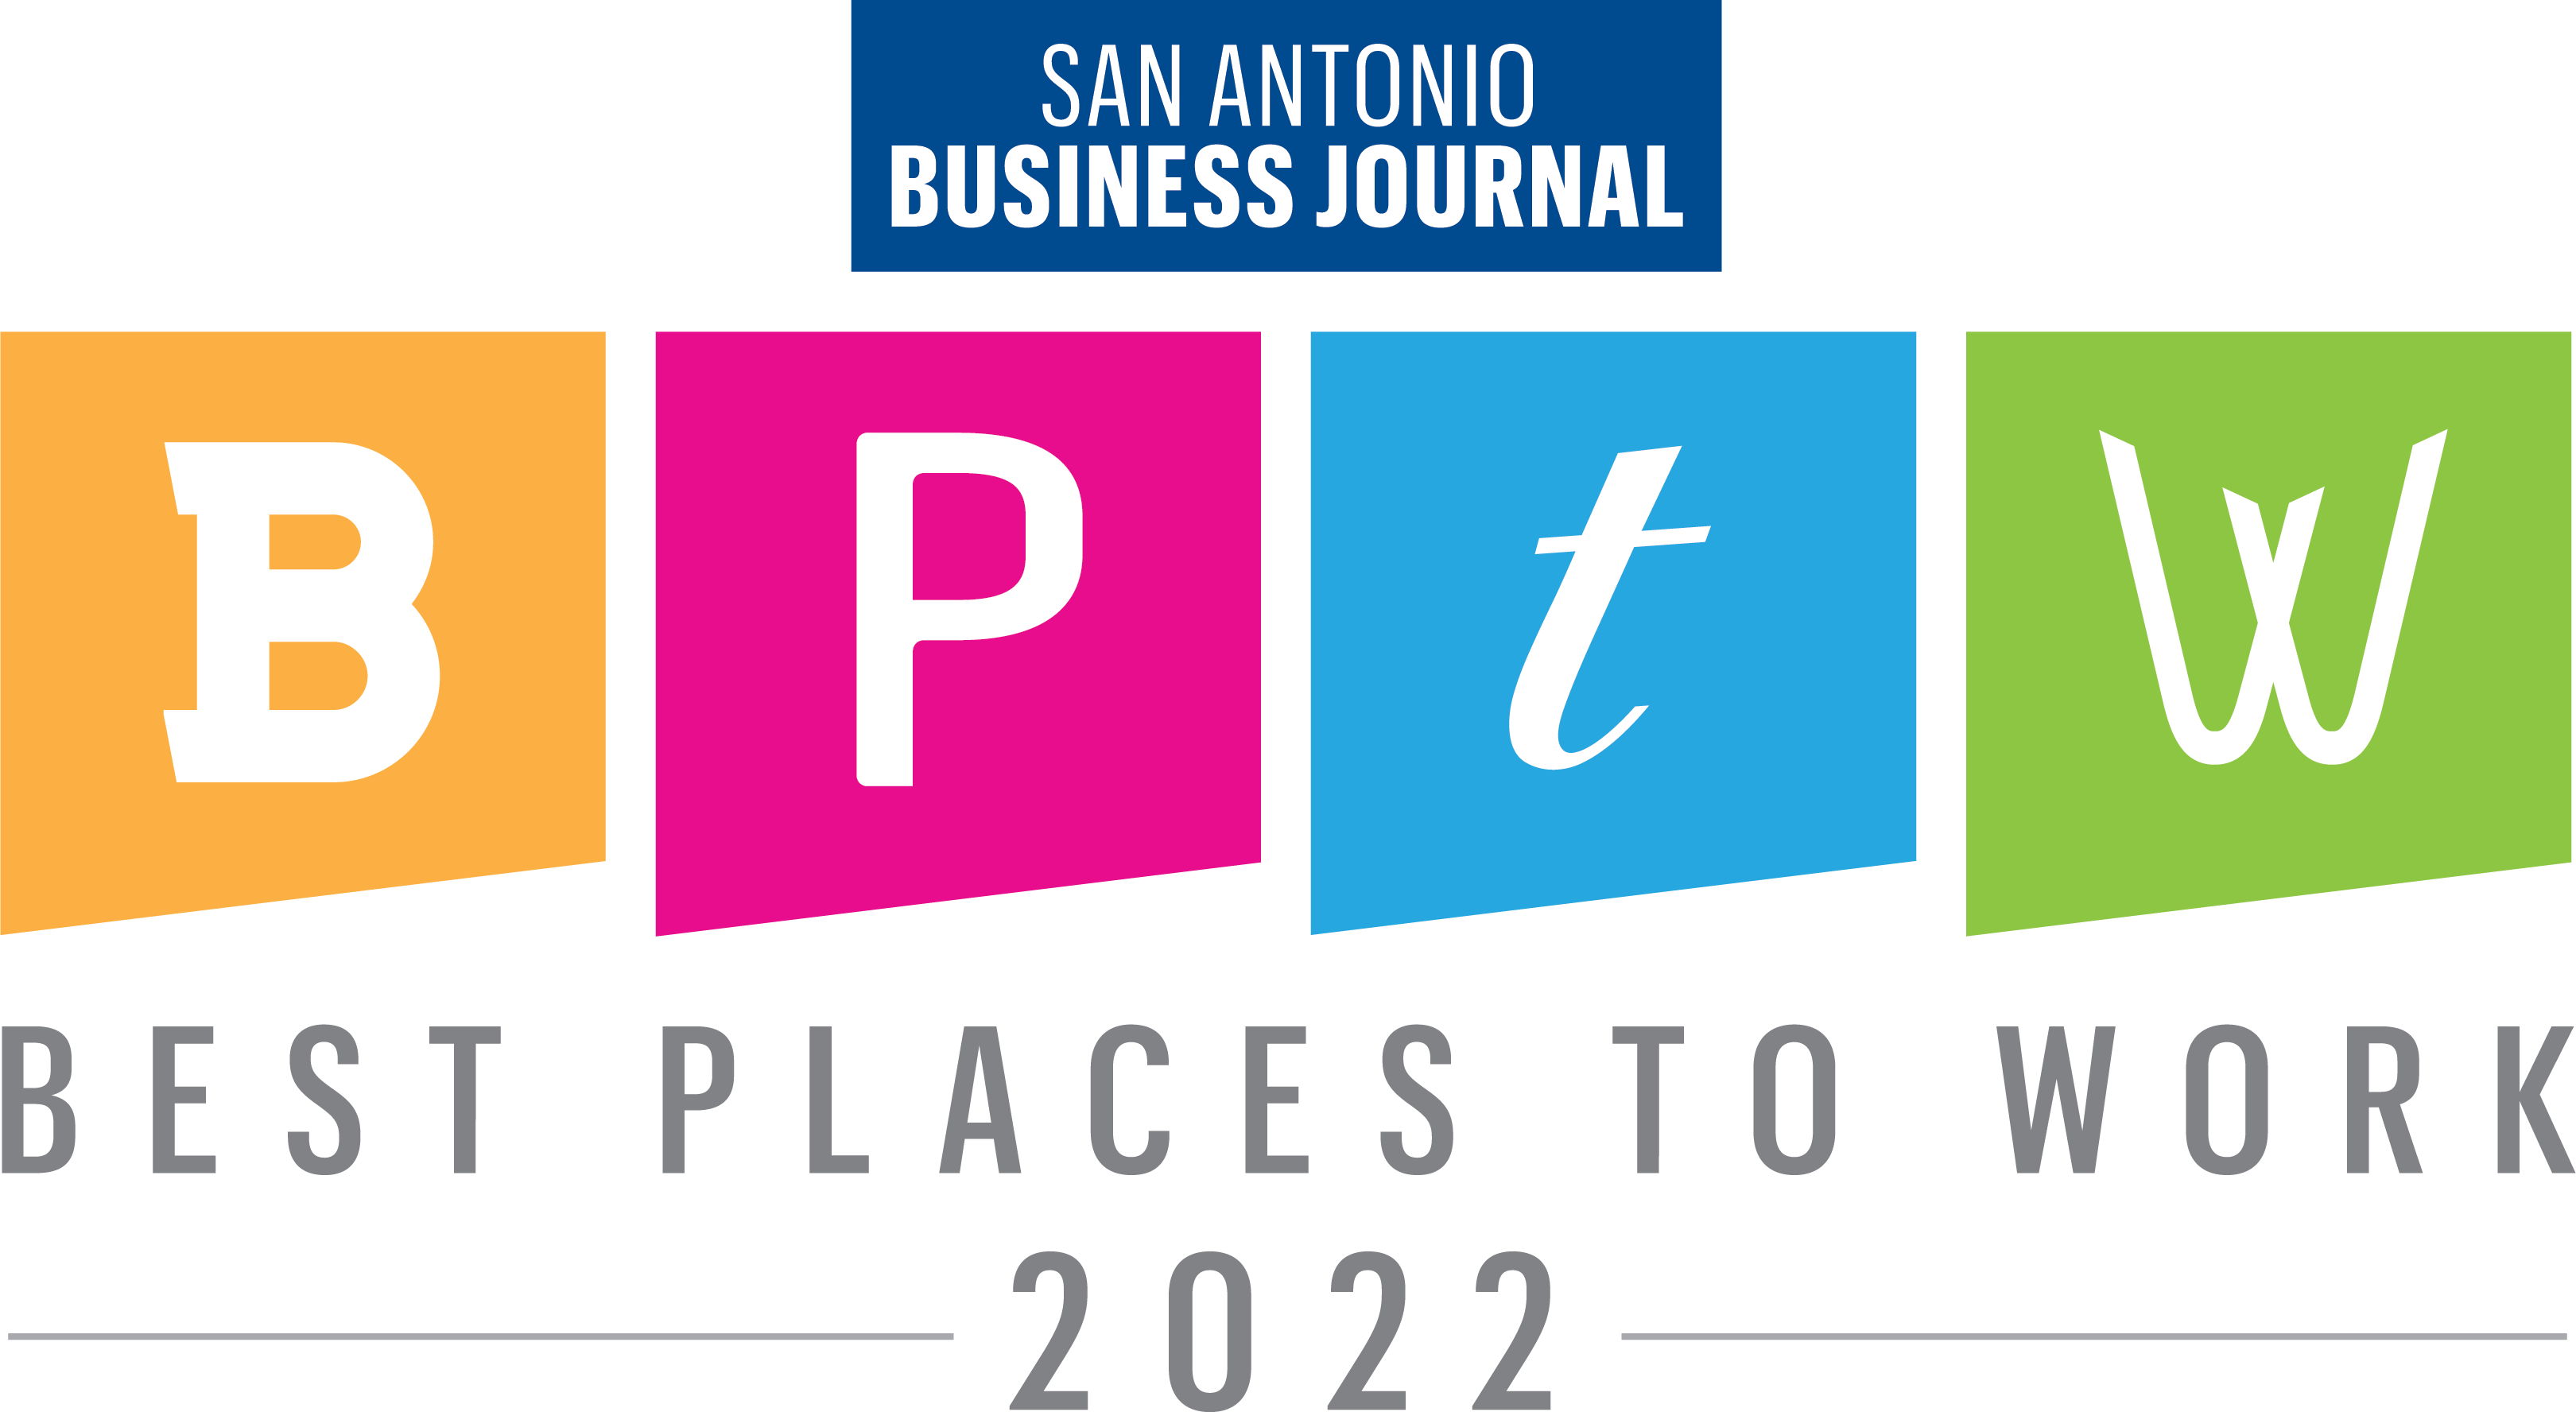 Firstmark Credit Union is recognized as a best places to work in San Antonio